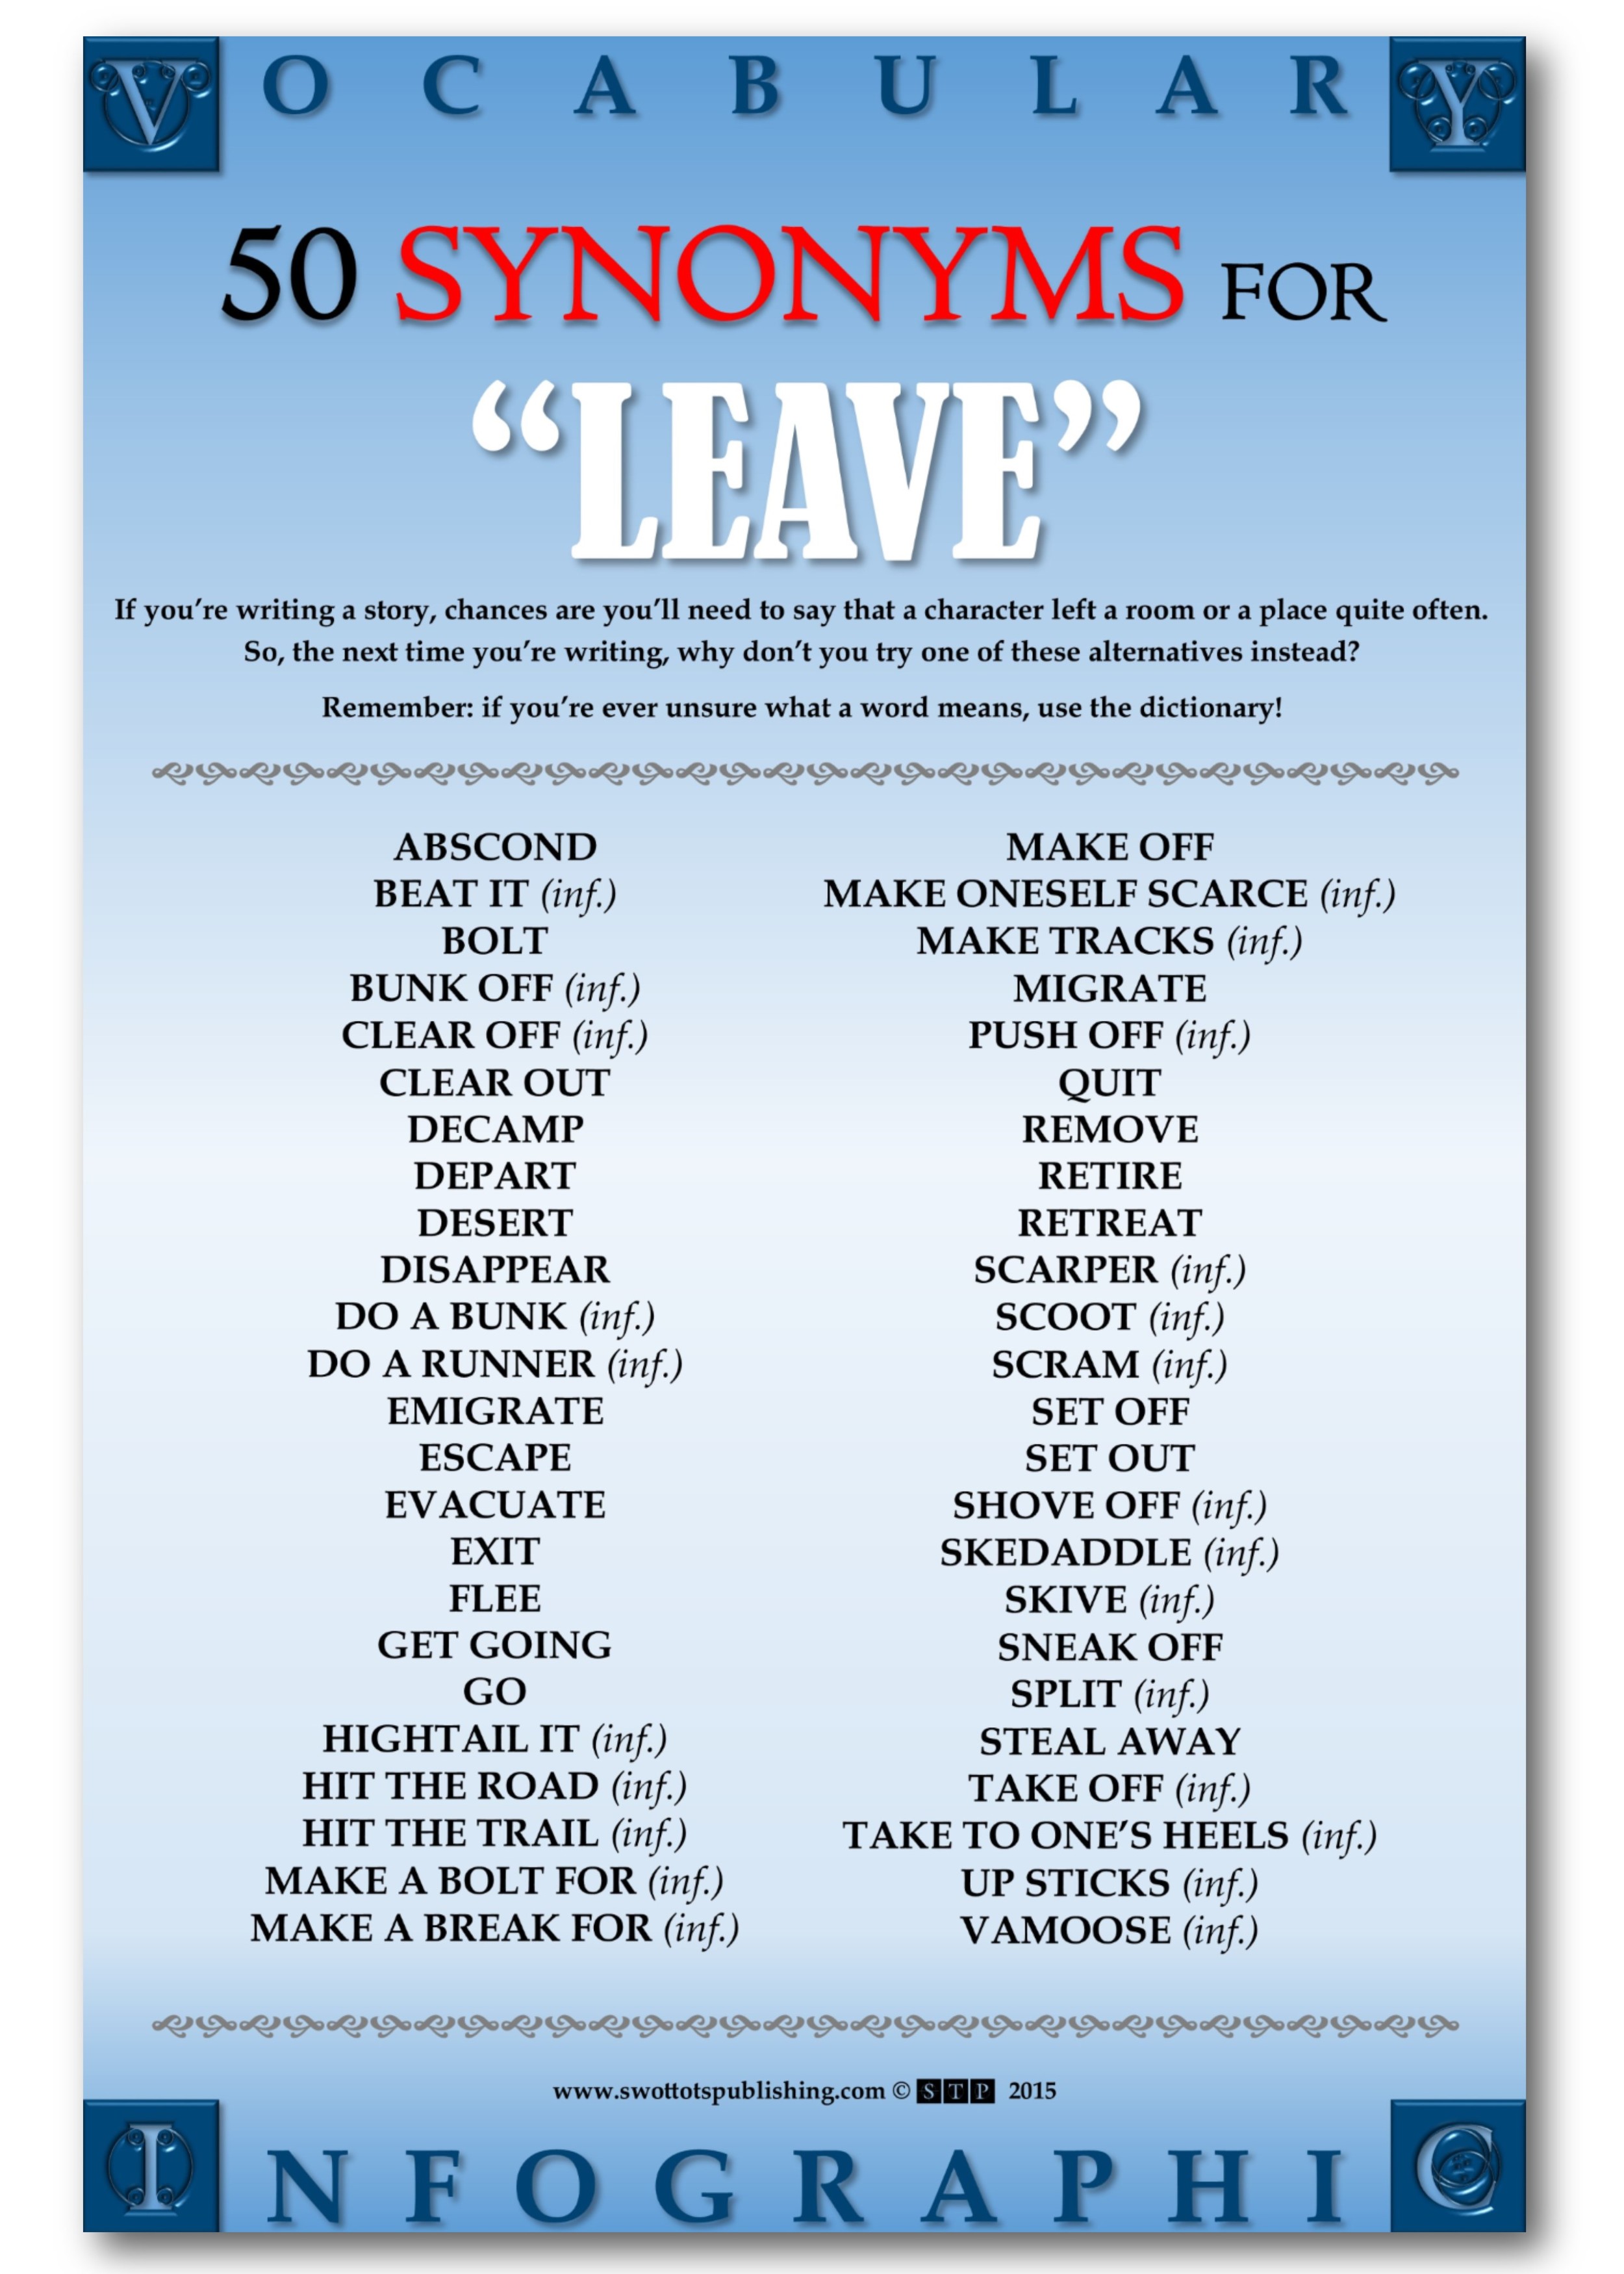 Vocabulary Infographic Gallery- Synonyms-Leave.jpg